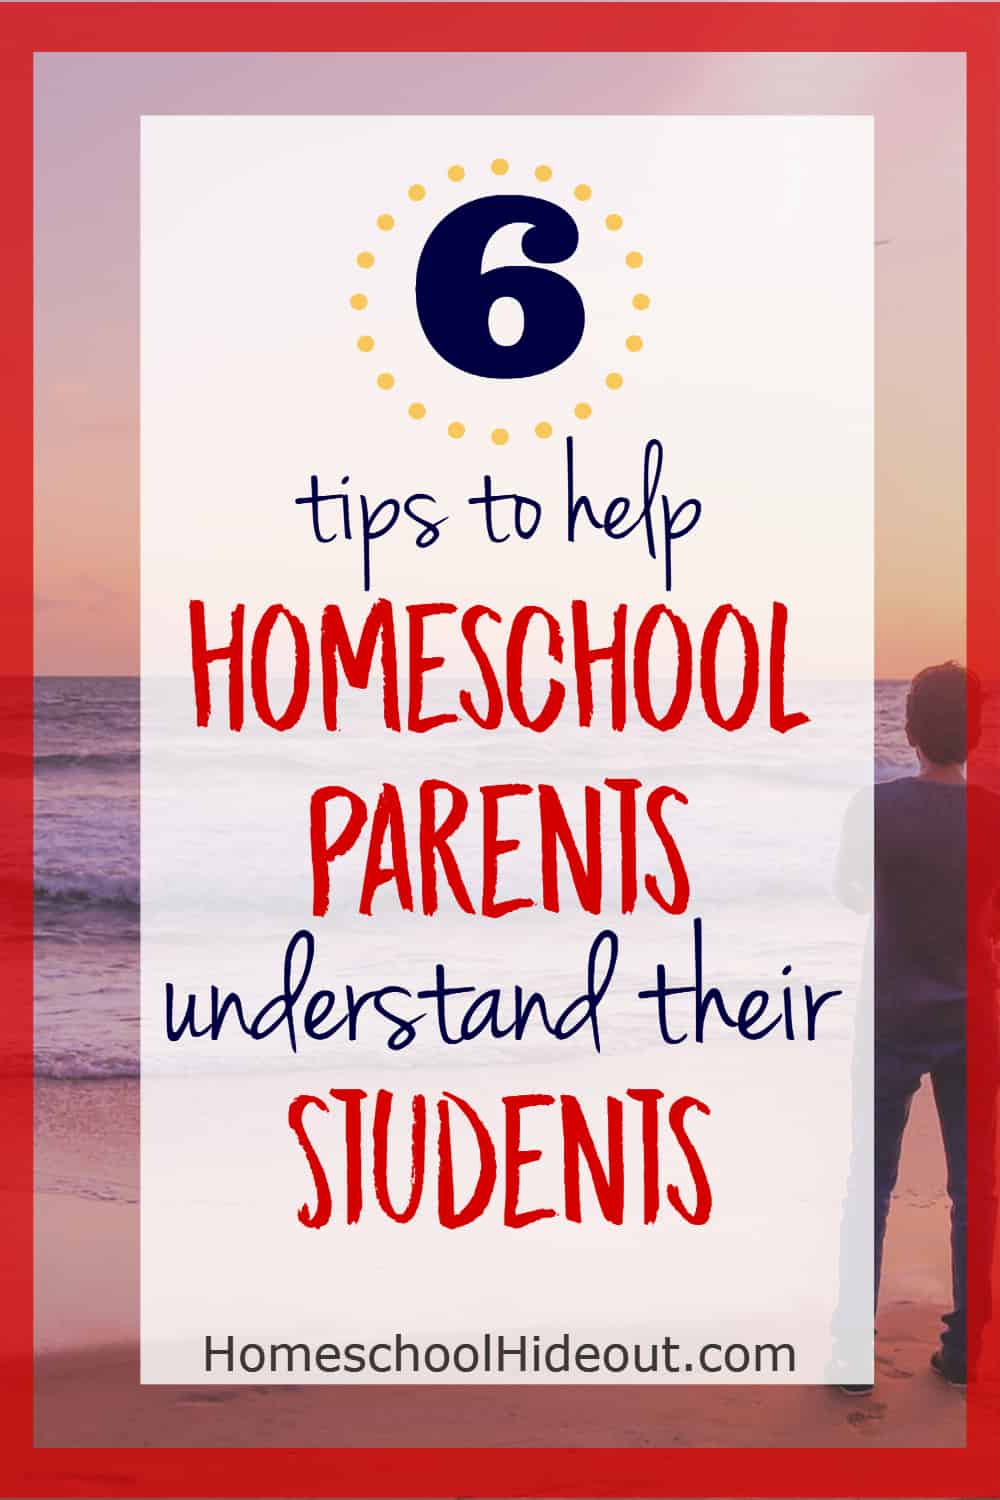 Being both mom and homeschool teacher is hard. These tips were perfect for helping parents understand students better. 